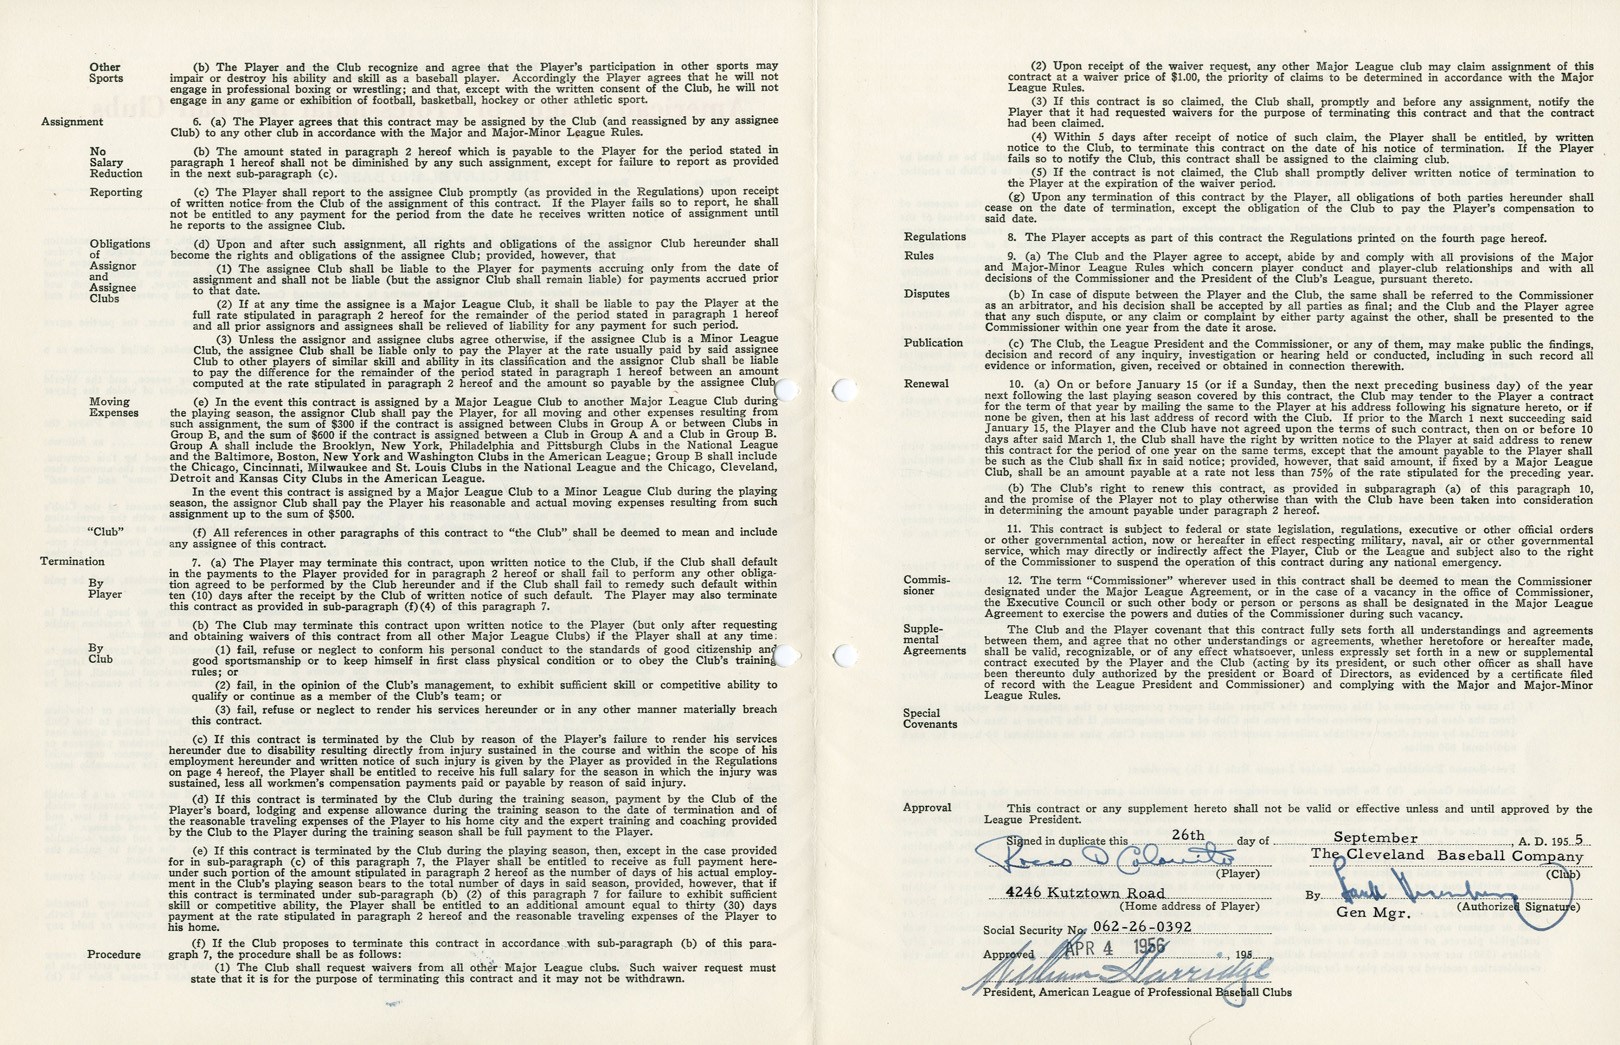 1956 Rocky Colavito Cleveland Indians Baseball Contract "Rookie of the Year" (PSA)